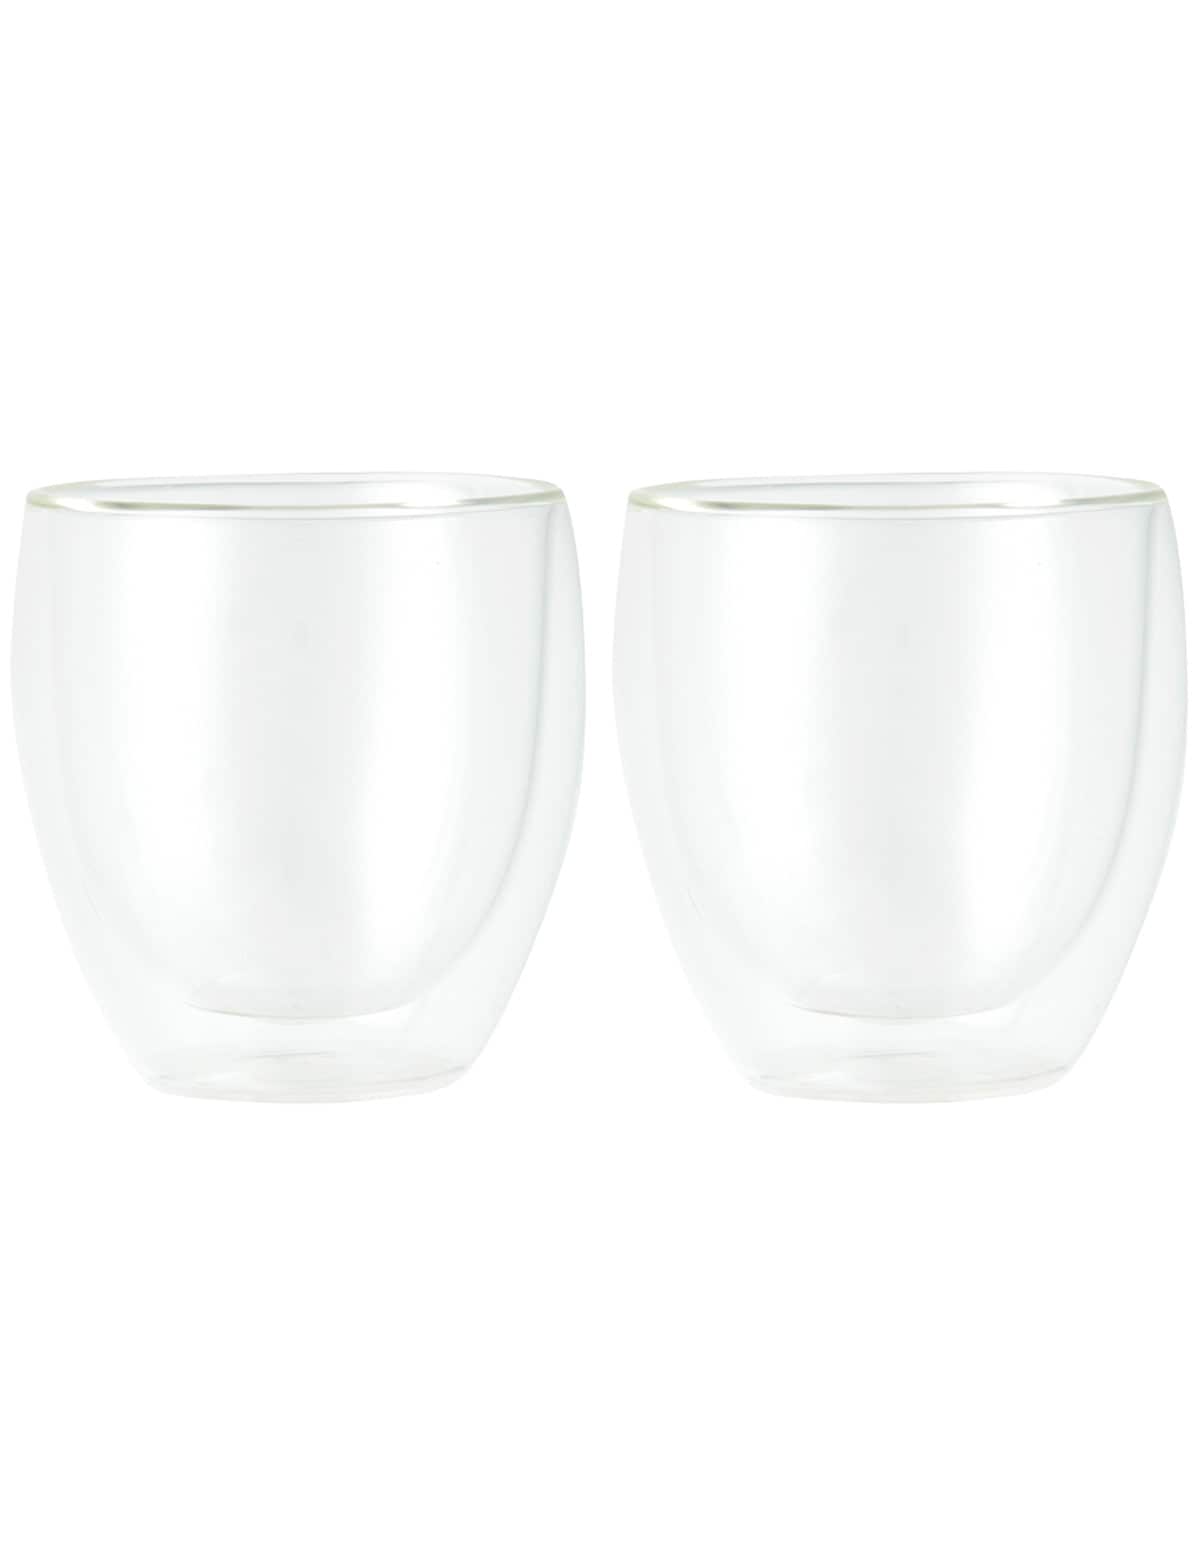 Bodum Pavina Double Wall Thermo-Glasses (Set of 2) - Browns Kitchen